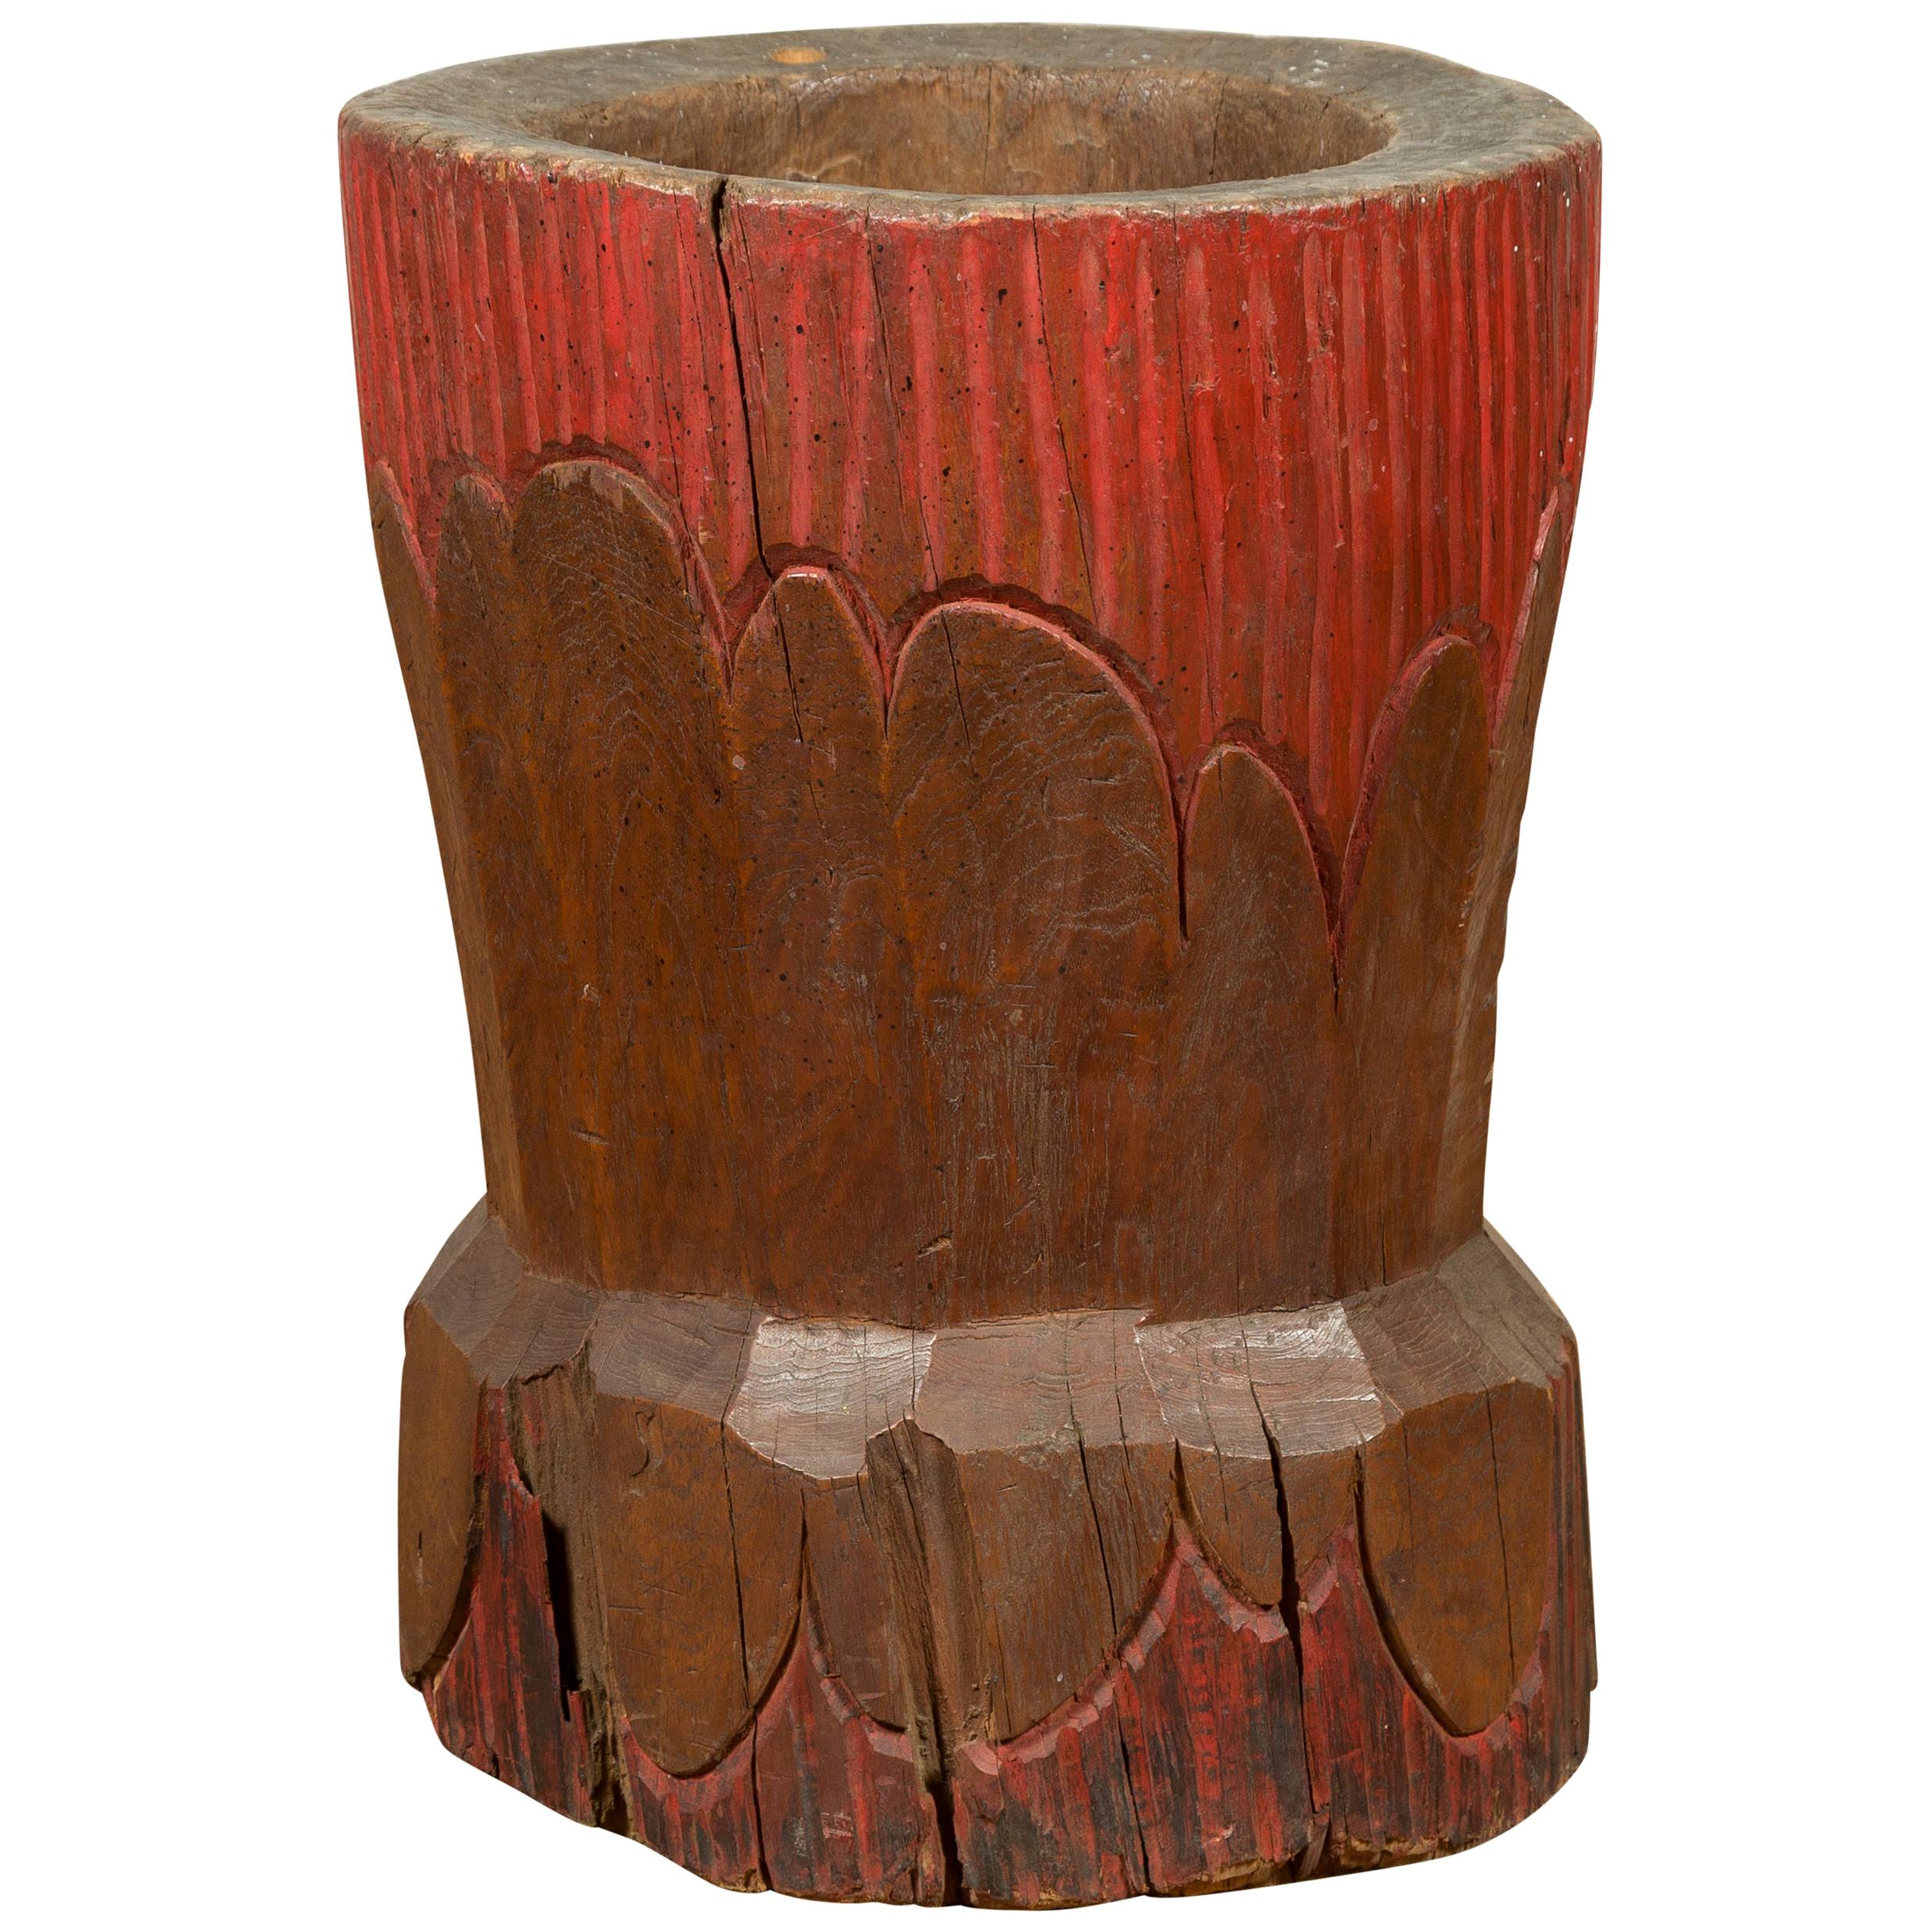 Antique Japanese Wooden Planter with Rustic Appearance and Red Patina For Sale